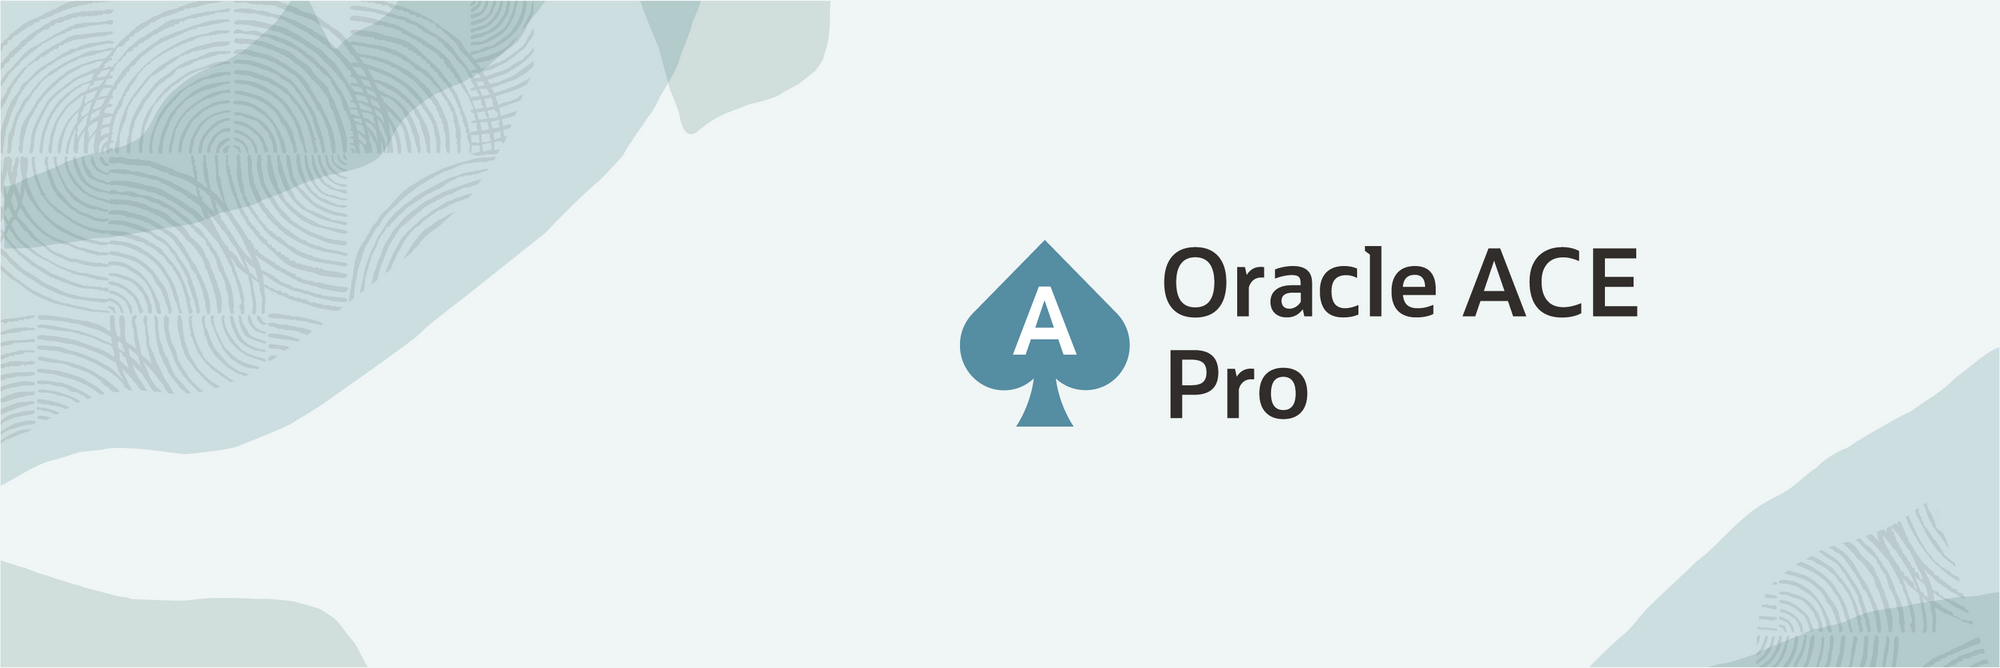 Oracle ACE Pro